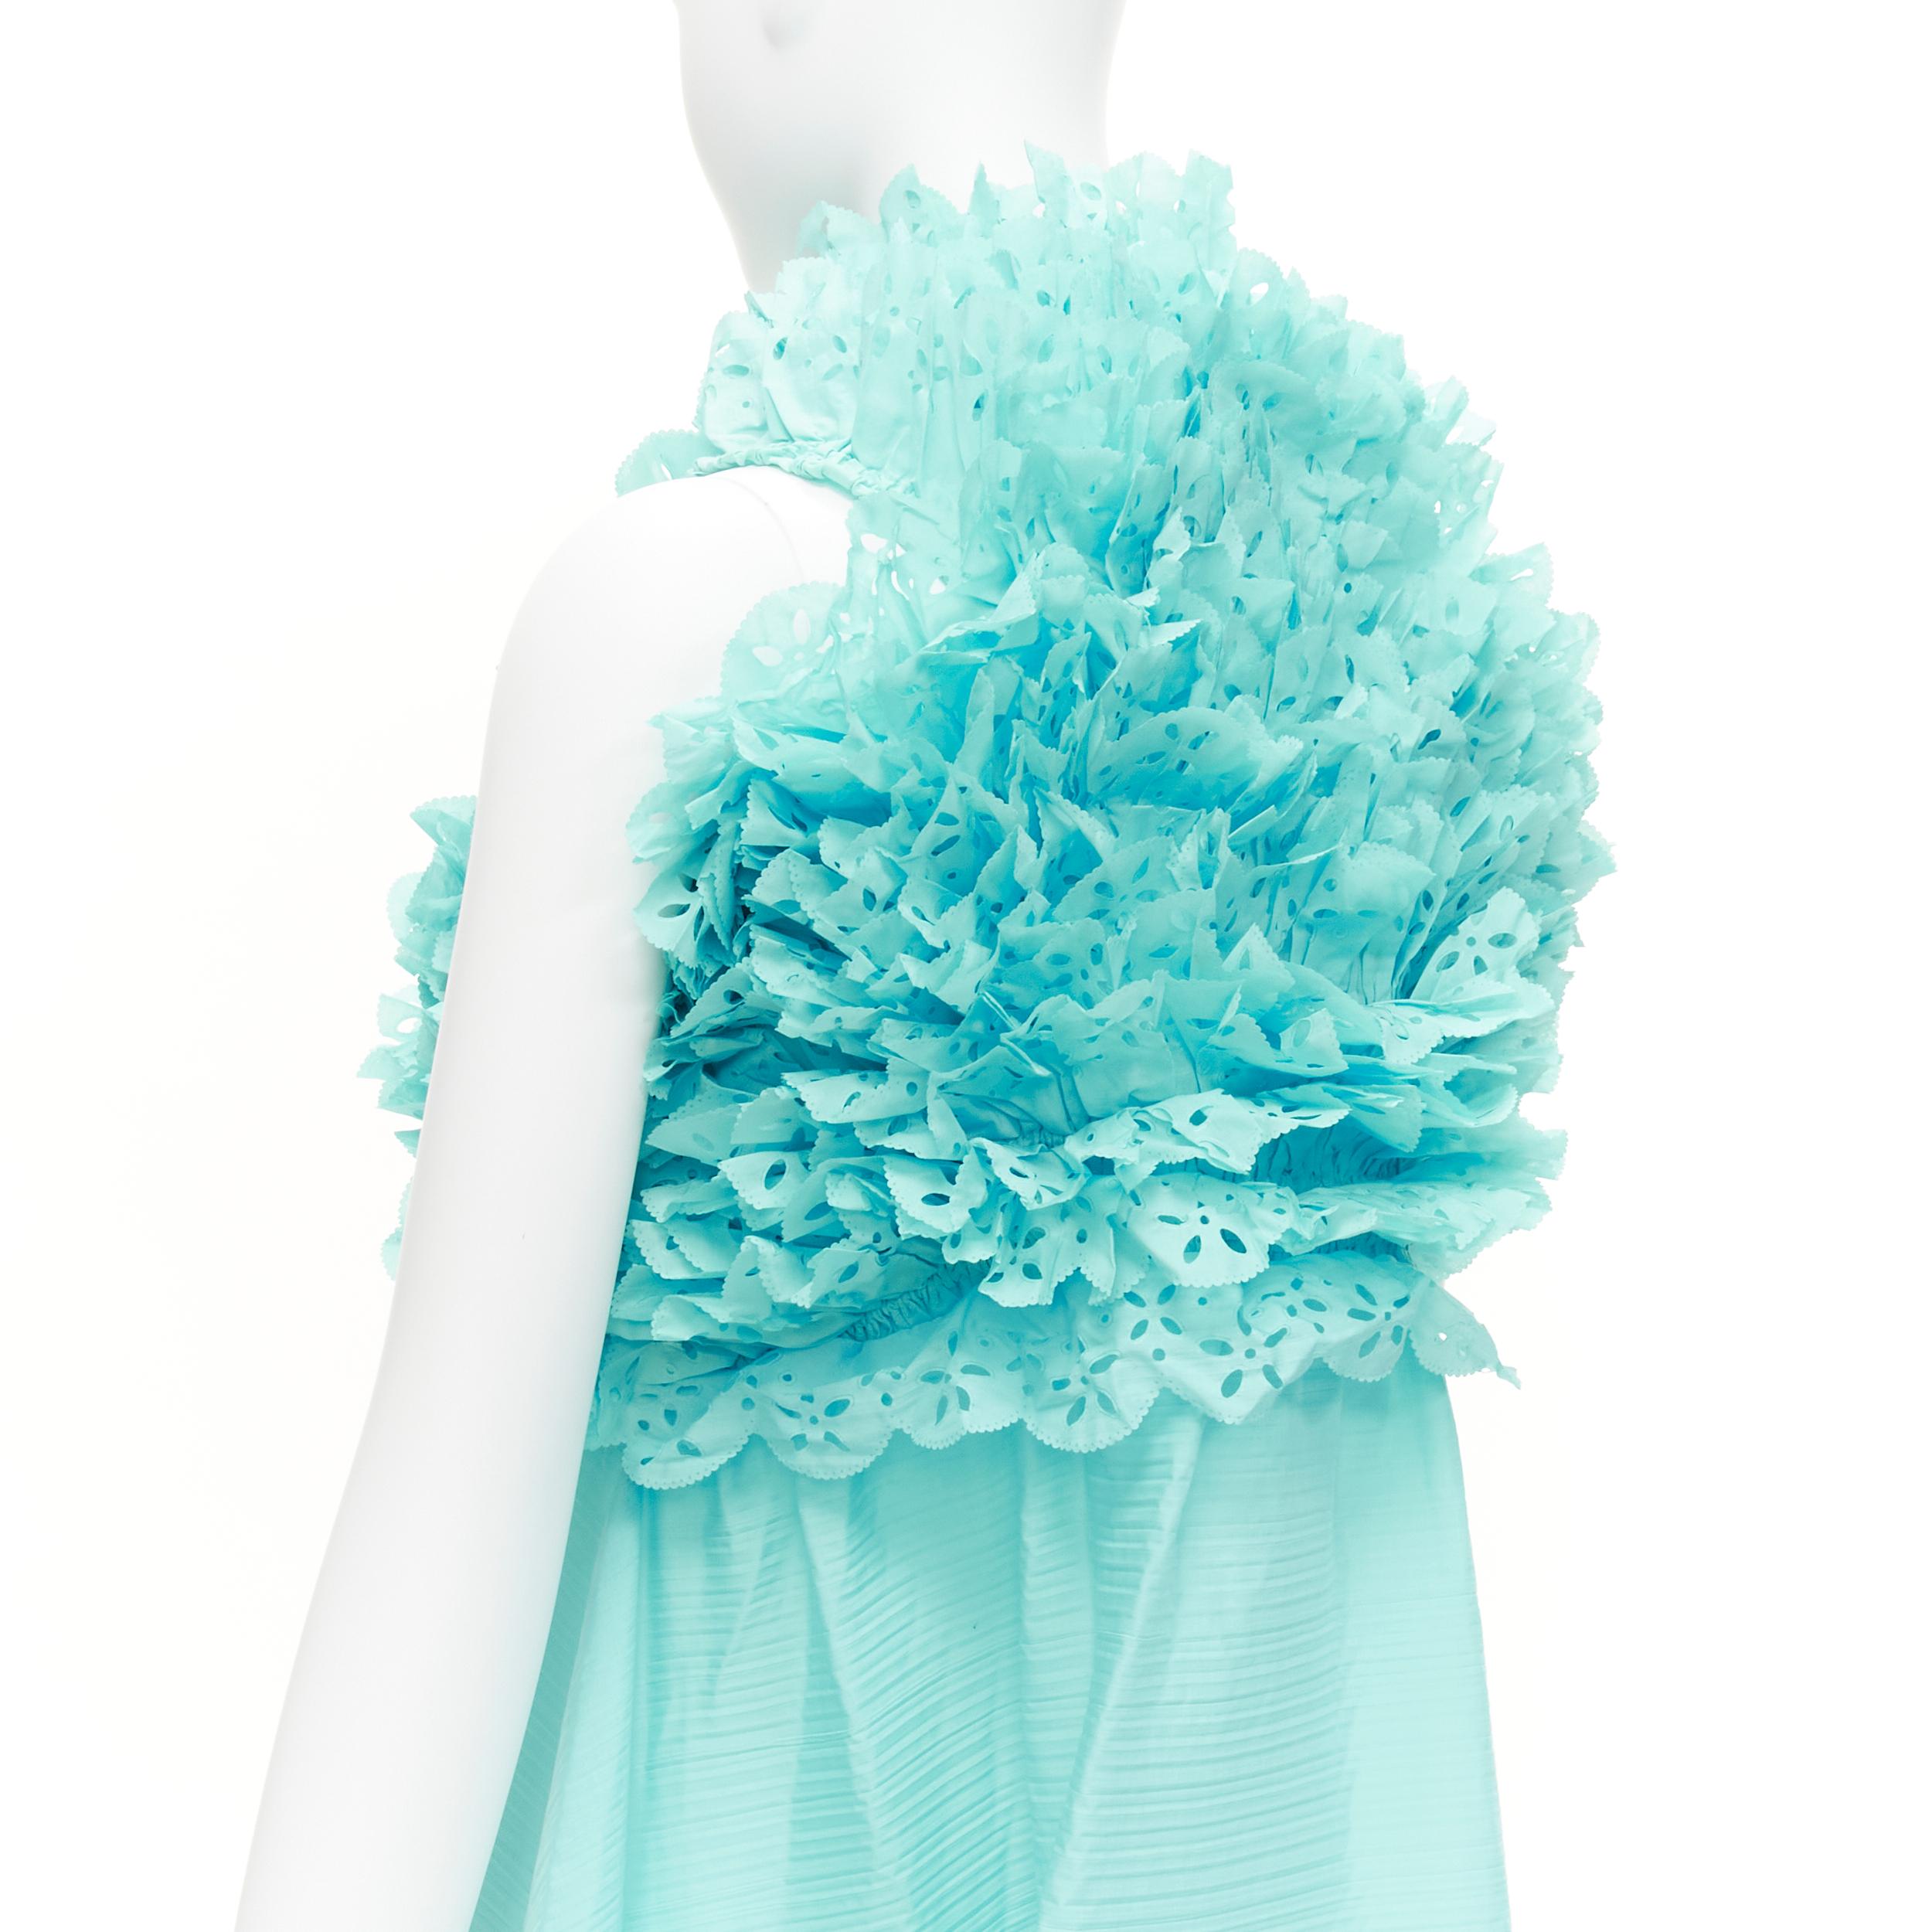 rare ISSEY MIYAKE sky blue laser cut ruffle high neck evening gown dress M For Sale 5